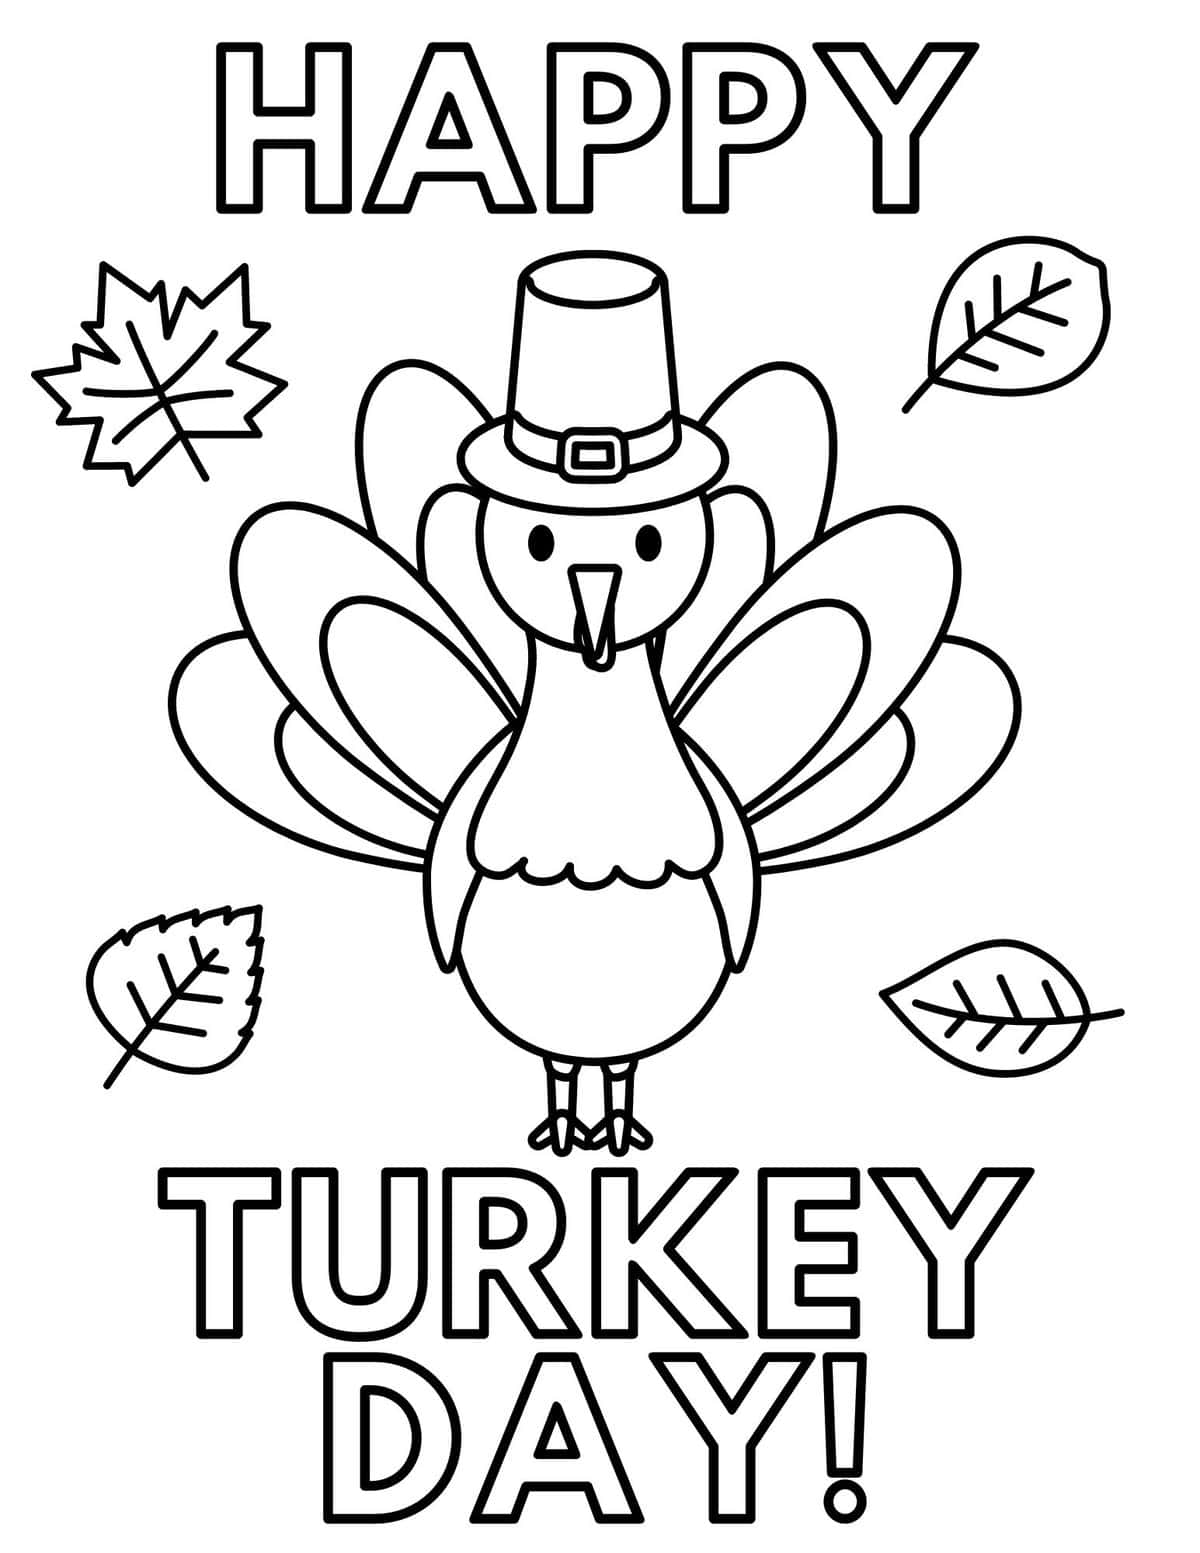 happy turkey day coloring sheet